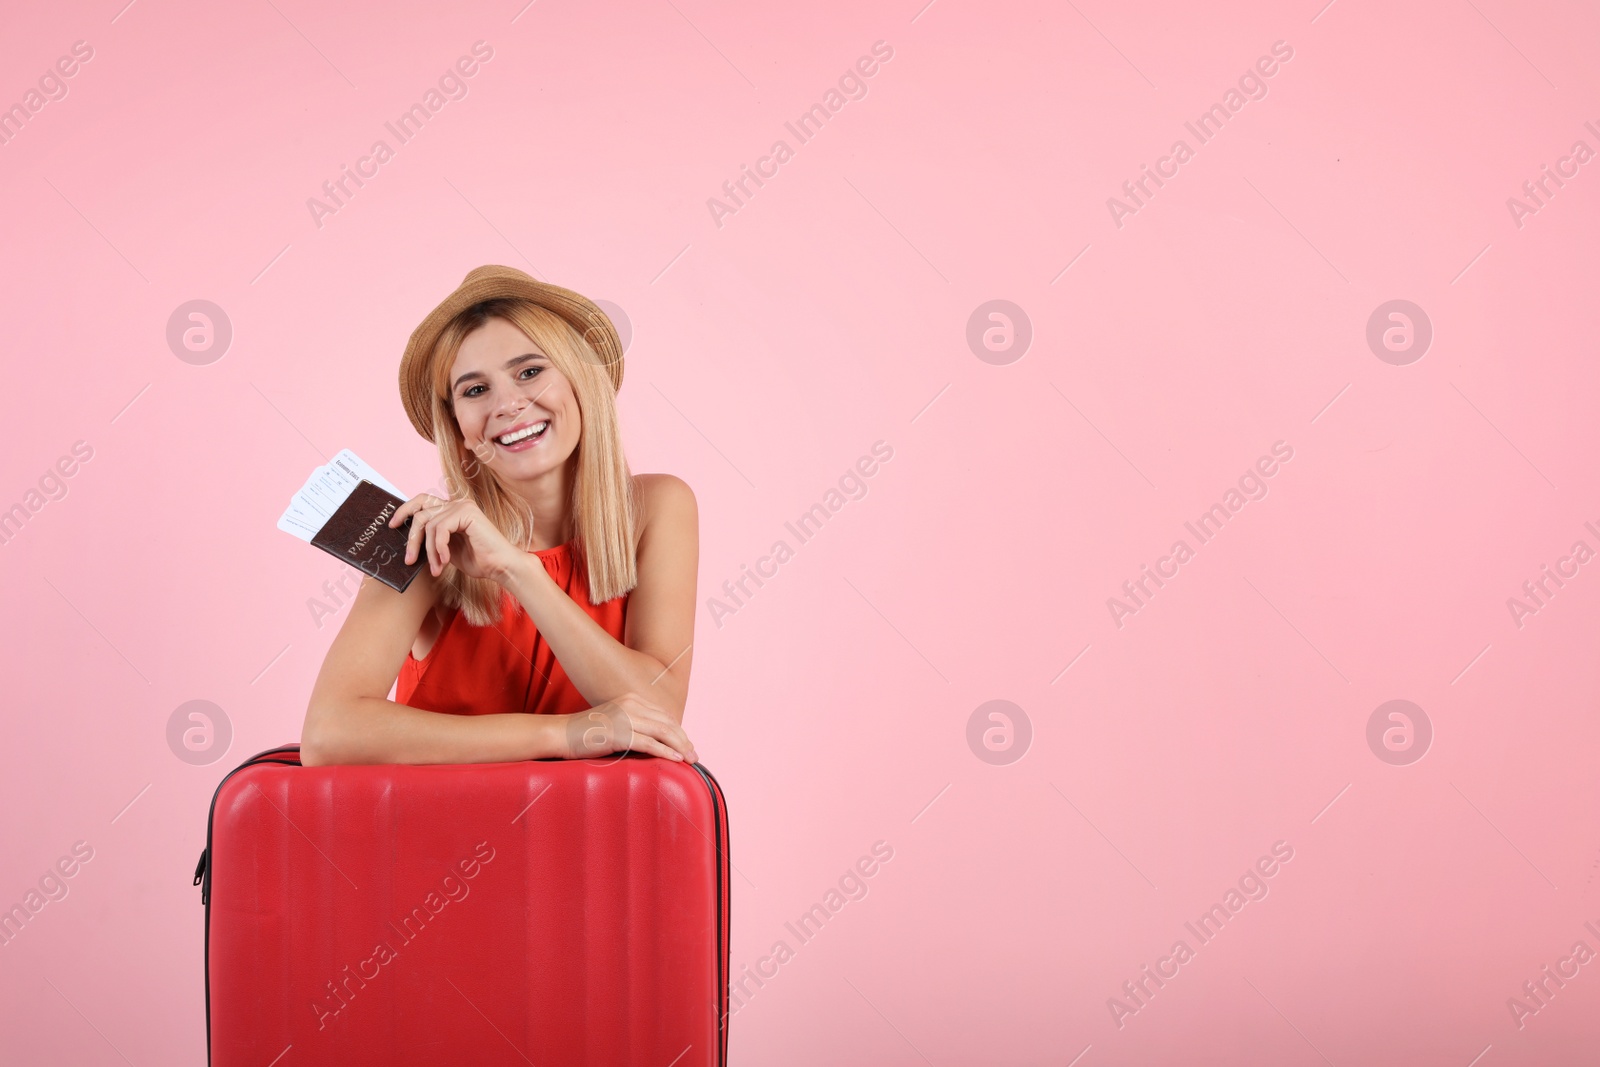 Photo of Woman with suitcase and passport on color background. Space for text